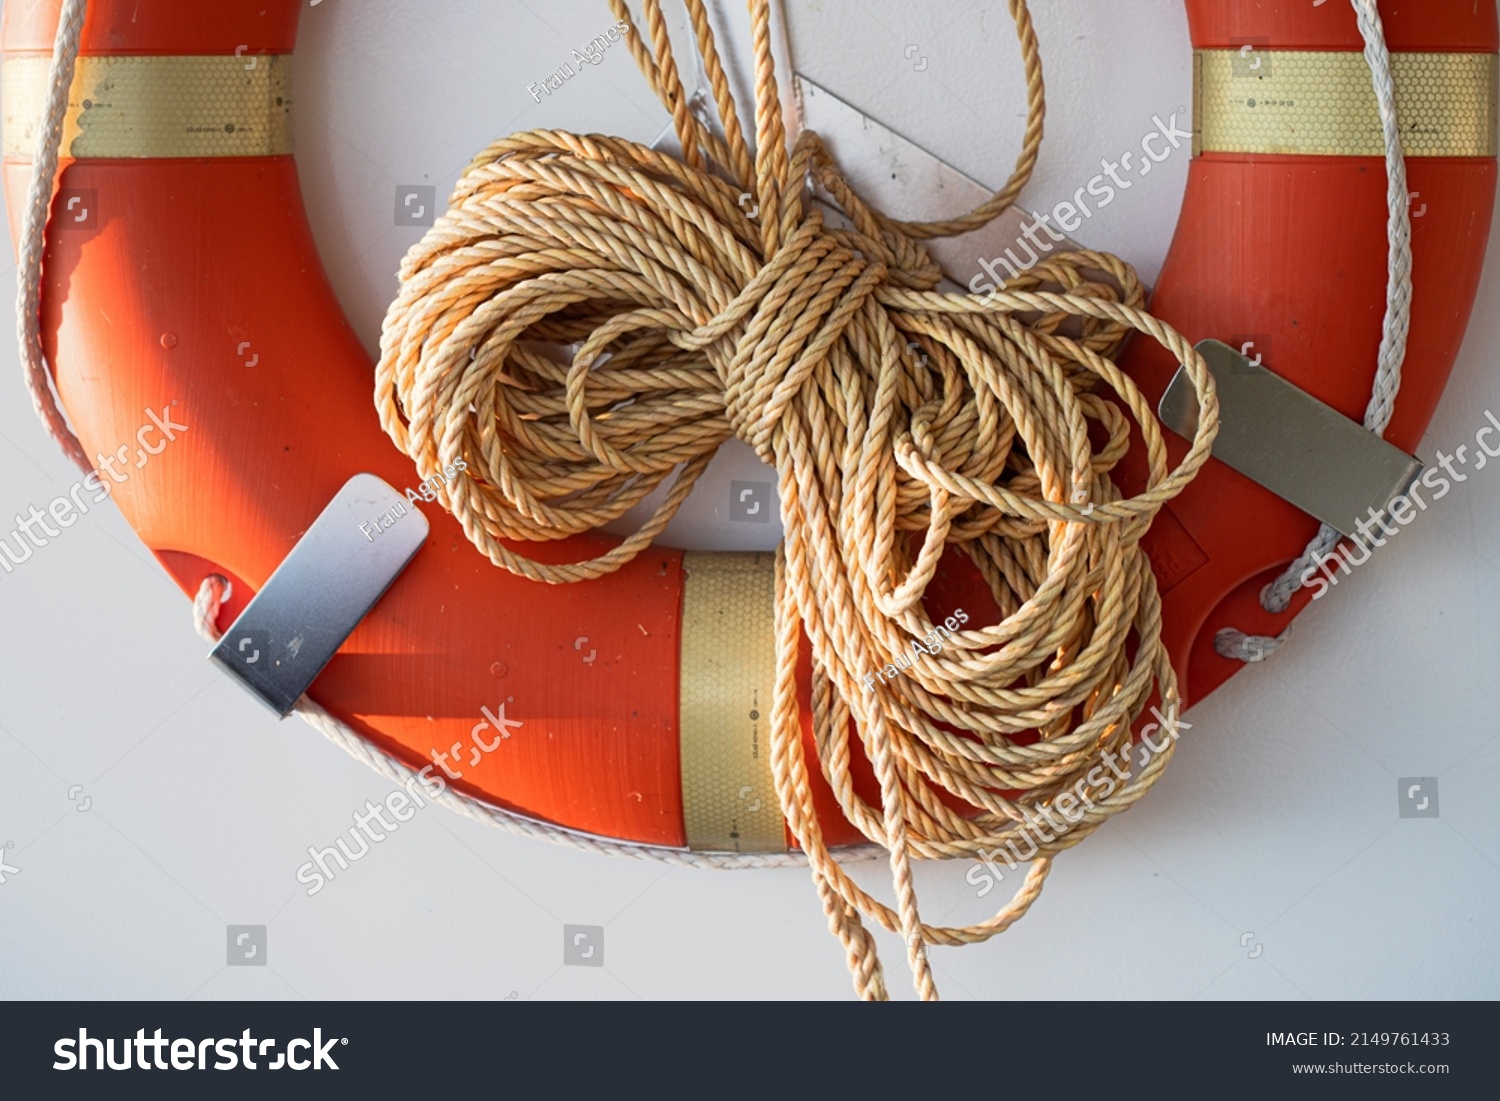 Coiled rope on a boat. Yellow rope and an orange lifebuoy on white wall of a sailboat of marina. Classic yacht or nautical vessel lifeguard resque equipment.  #2149761433